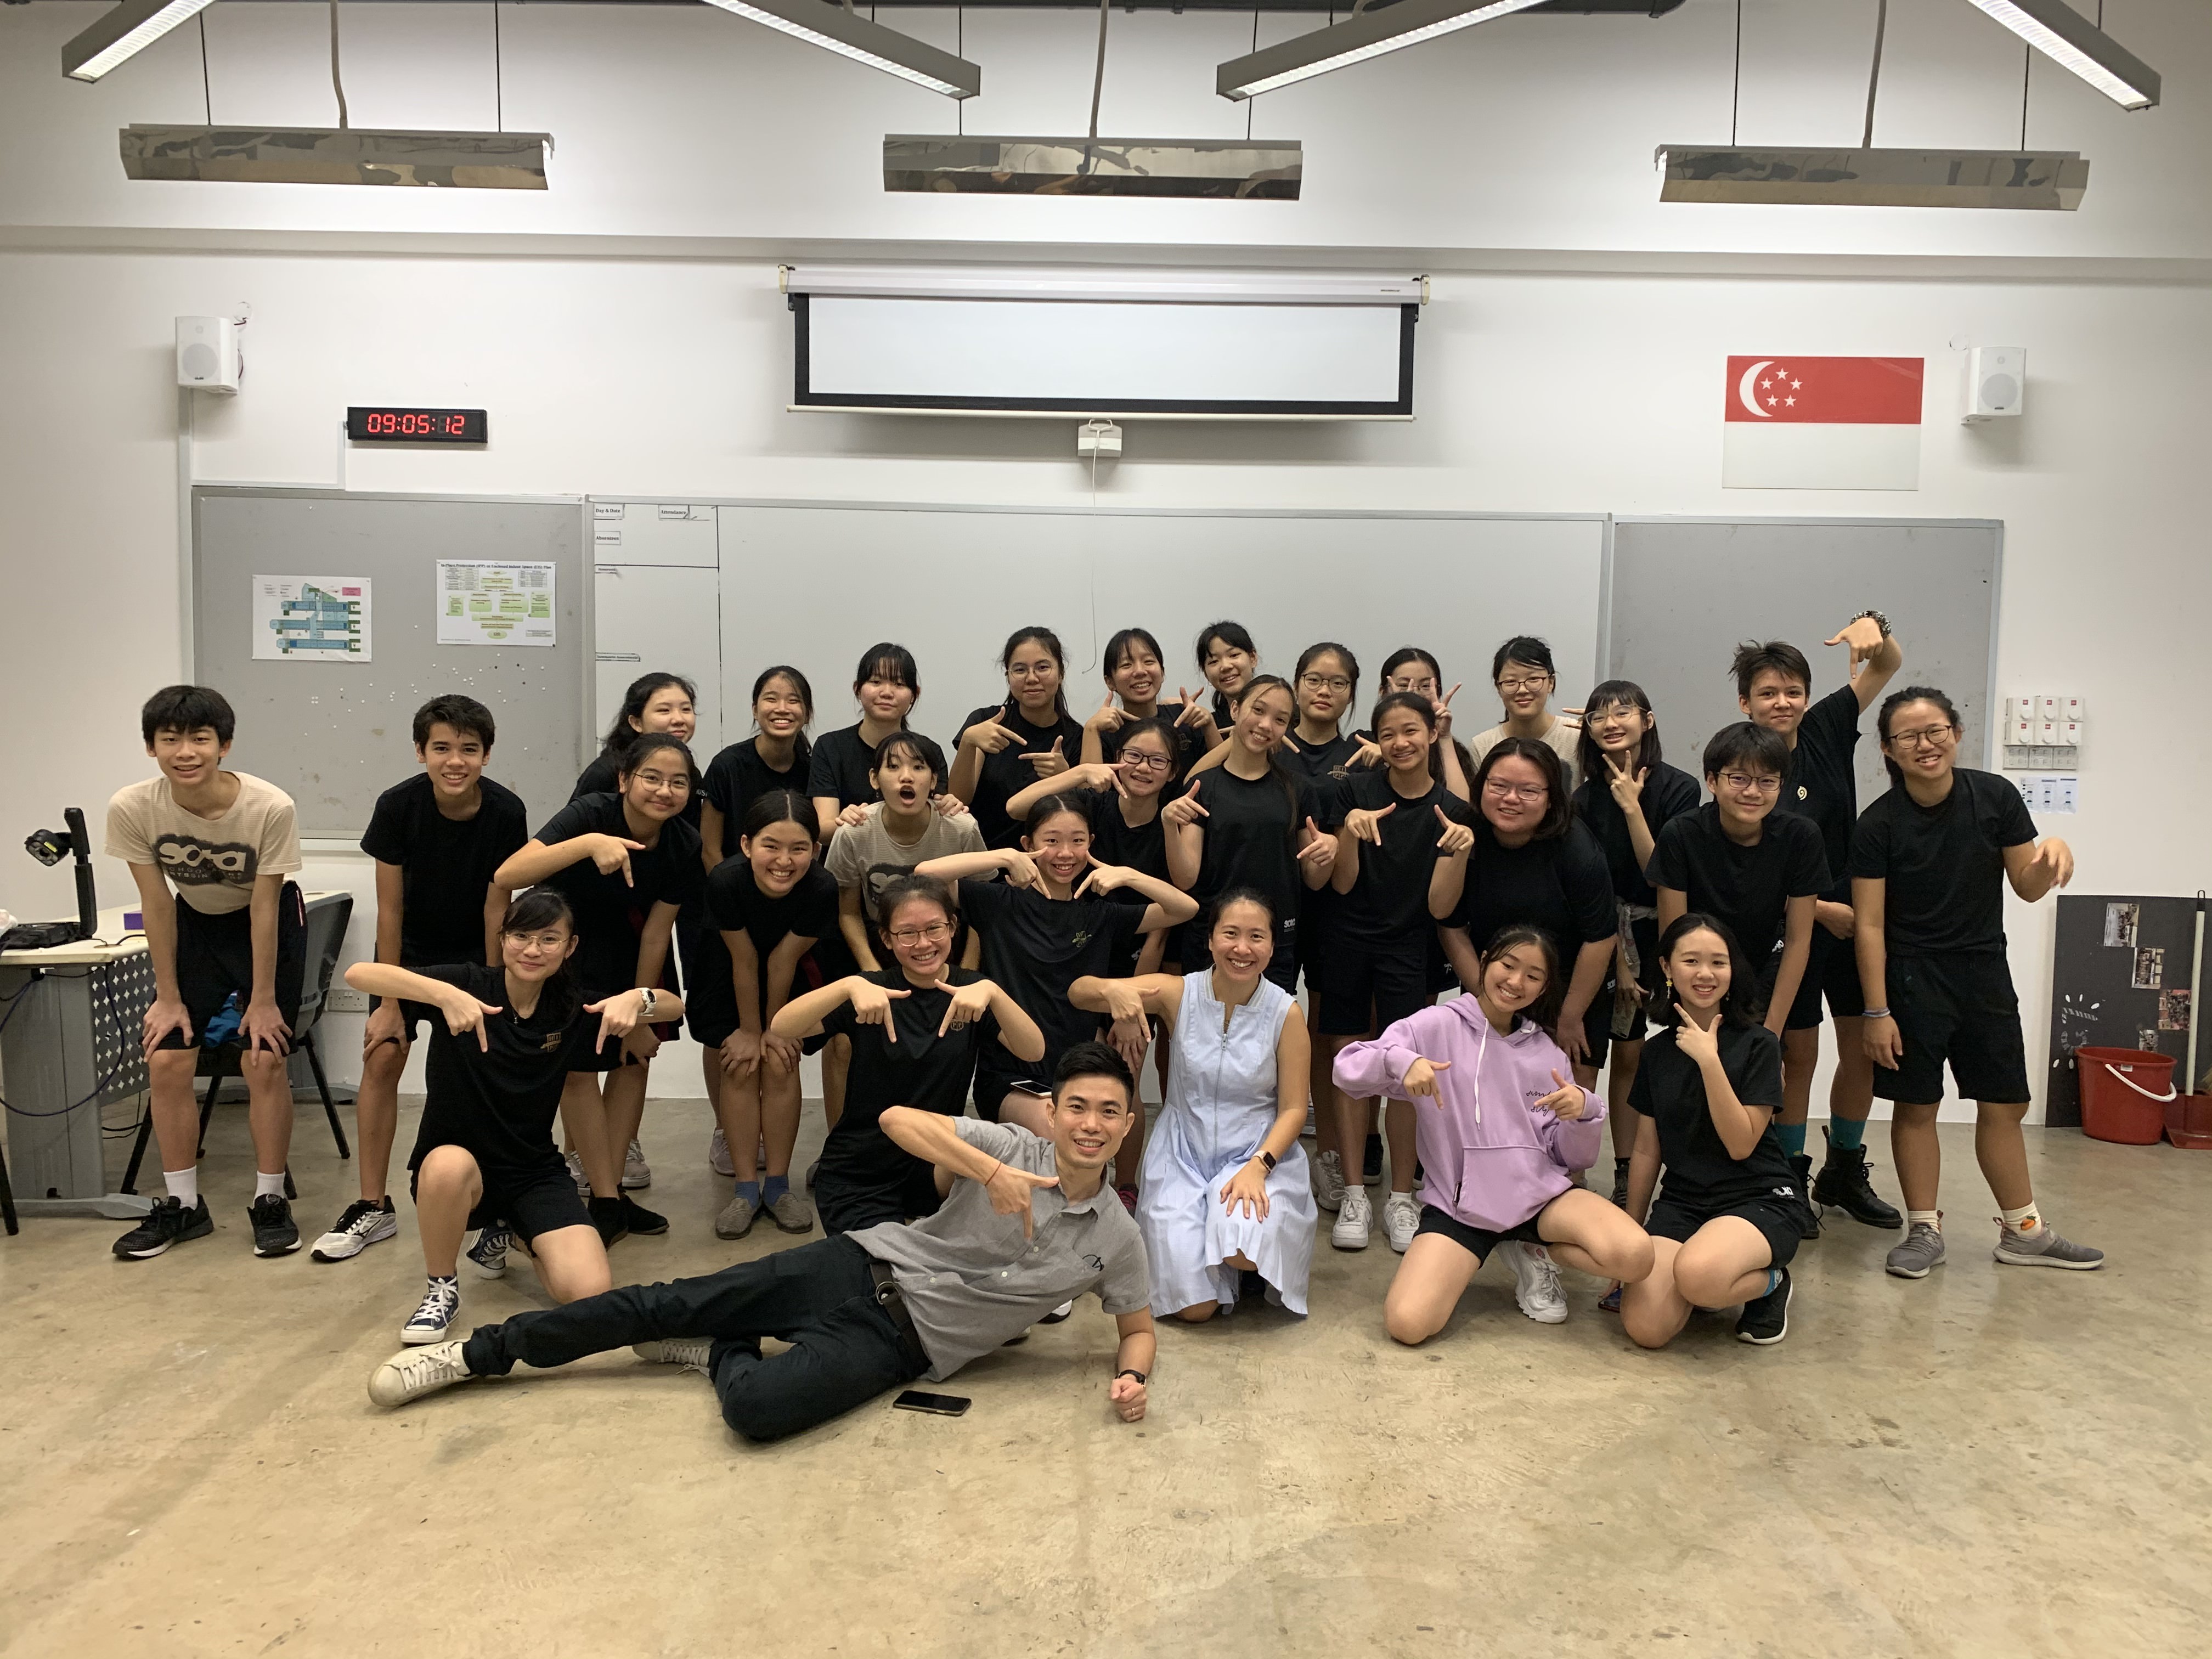 Mr Teng with his form class (2019)